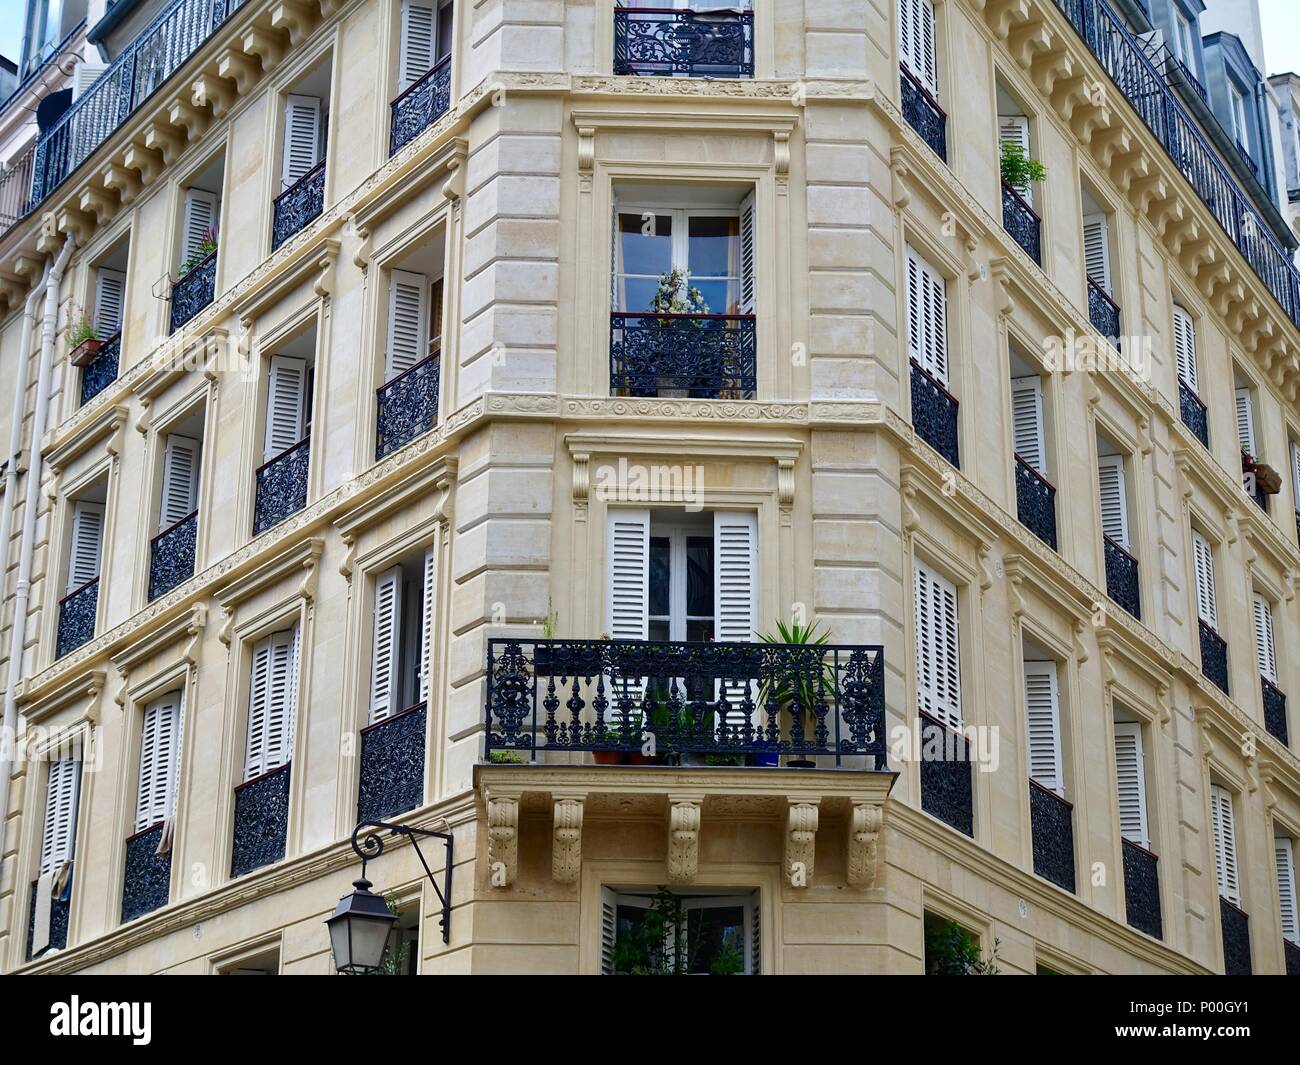 - images and stock balcony hi-res Alamy Paris photography